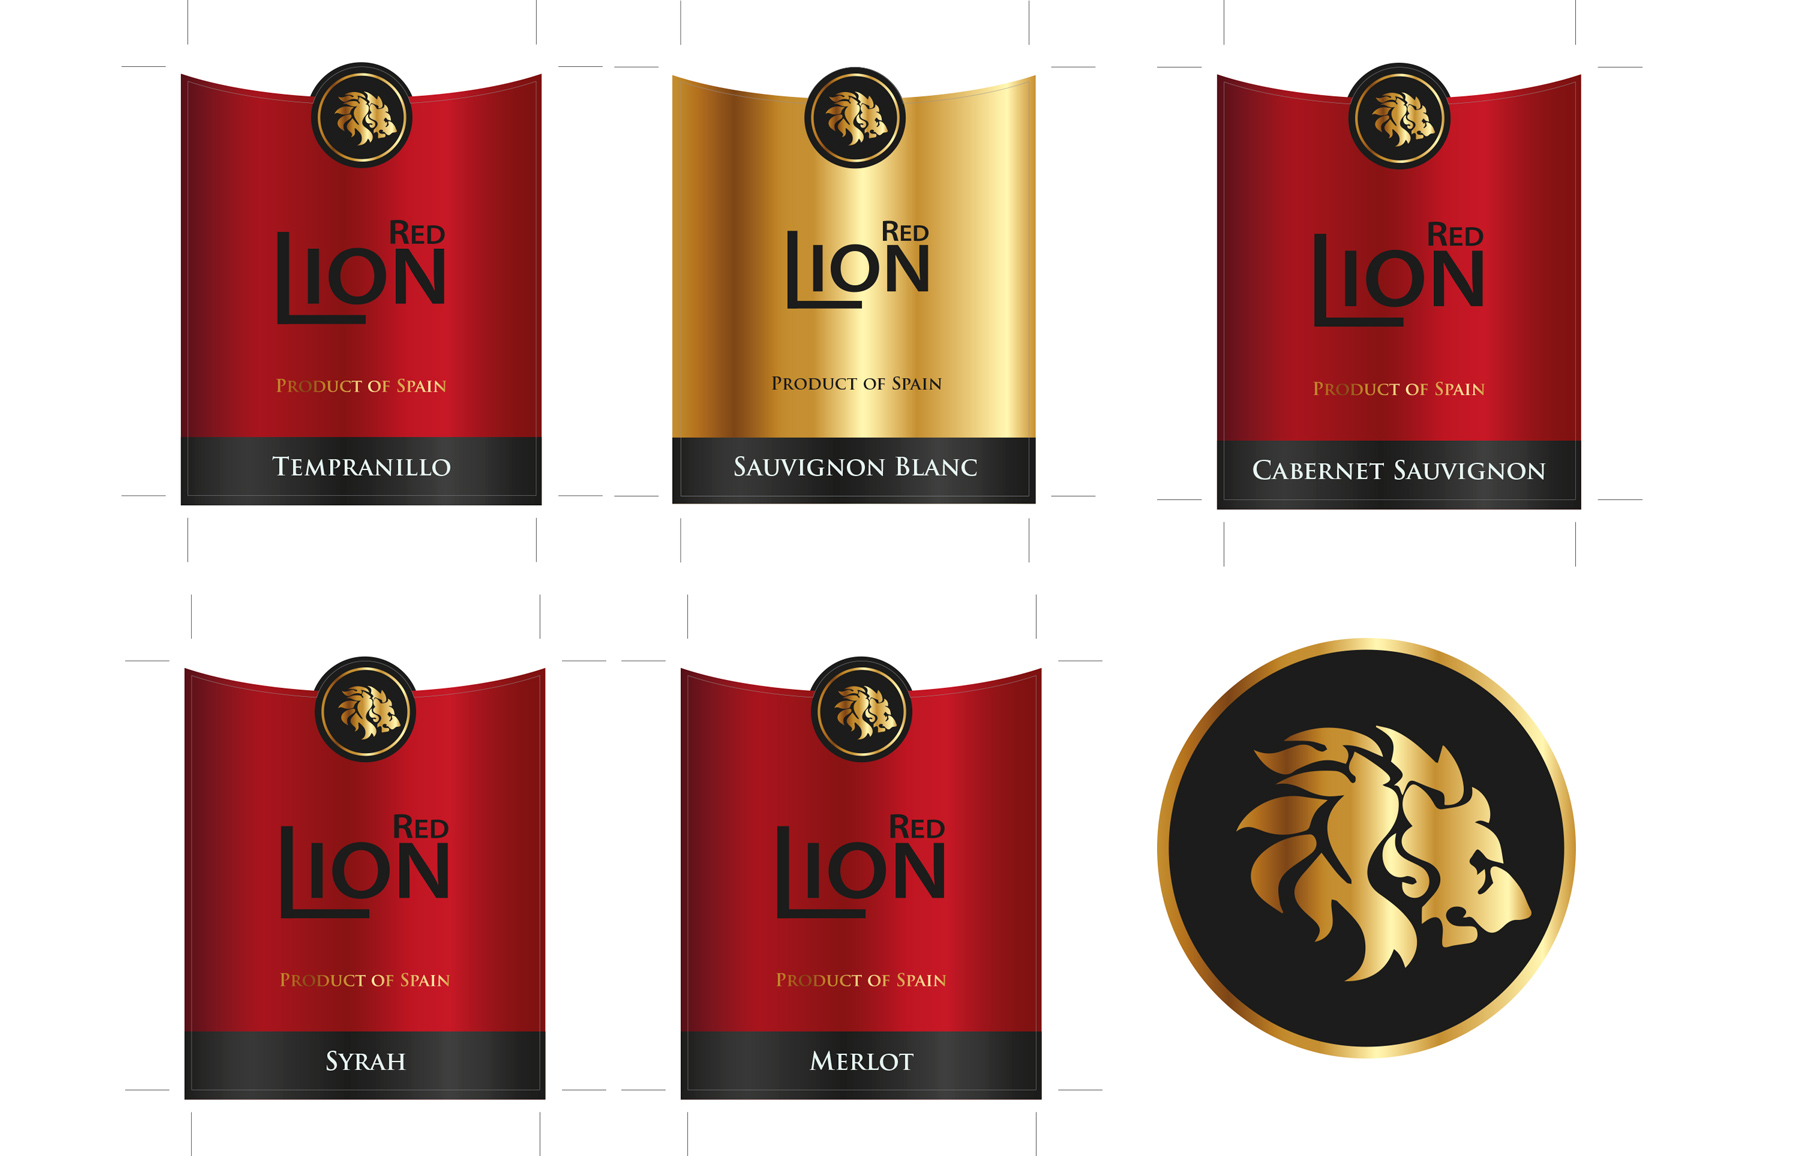 Portfolio of graphic and creative design works on wine labels and packaging for Spanish wine: RED LION for export to China and Eastern countries